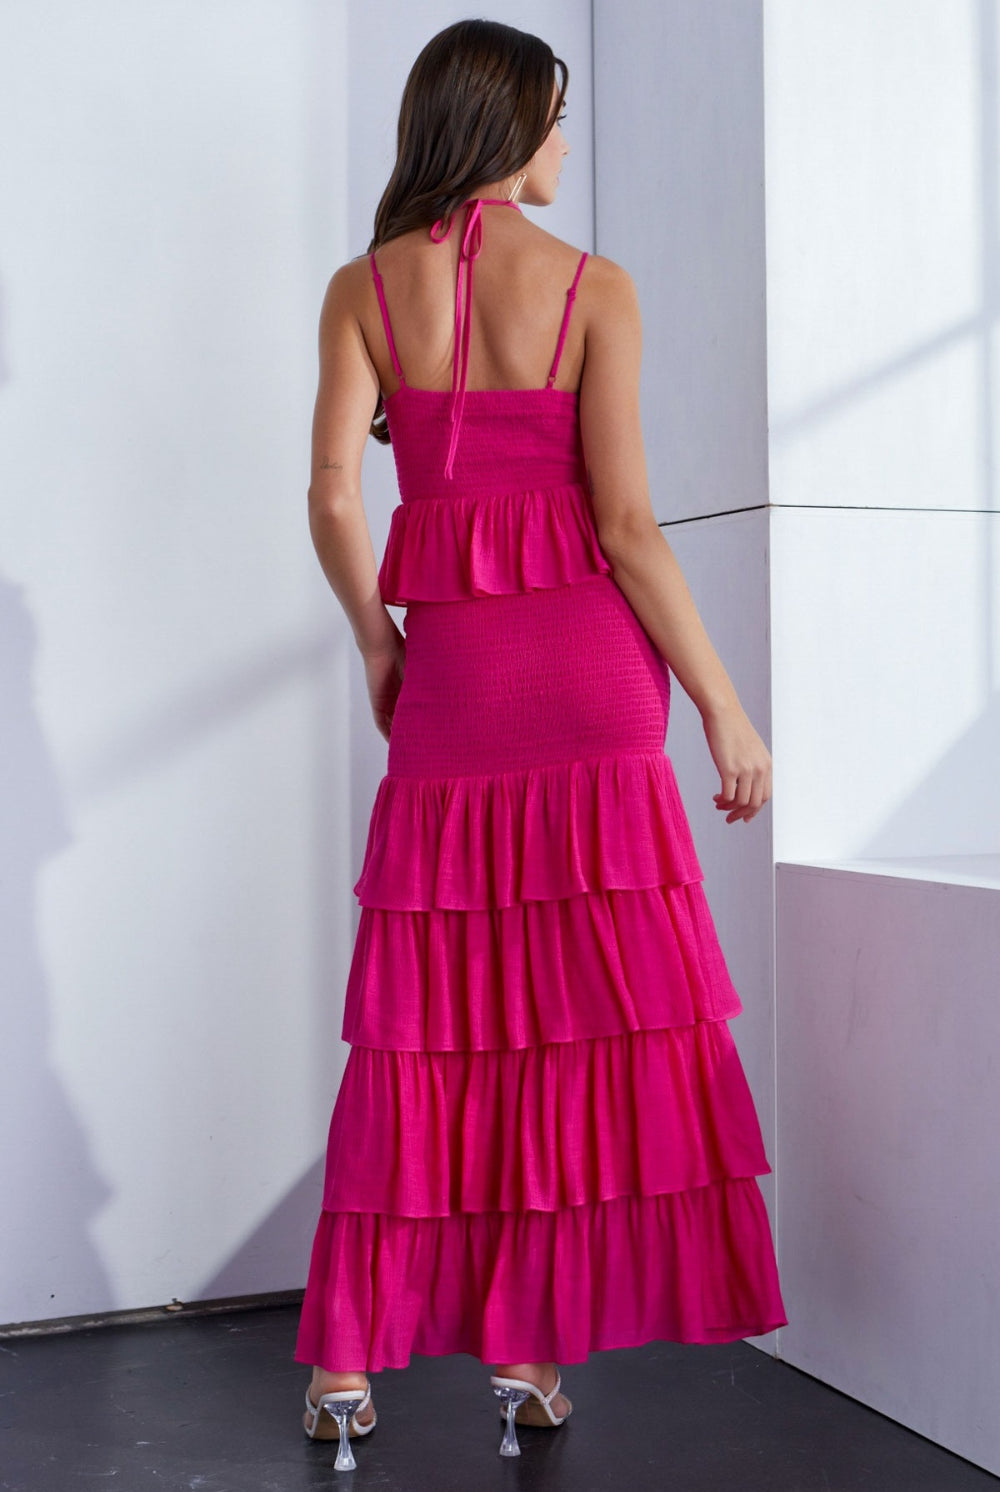 A woman wearing a vibrant pink ruffled dress with layered detailing and a sleeveless design, exuding elegance and playful femininity.